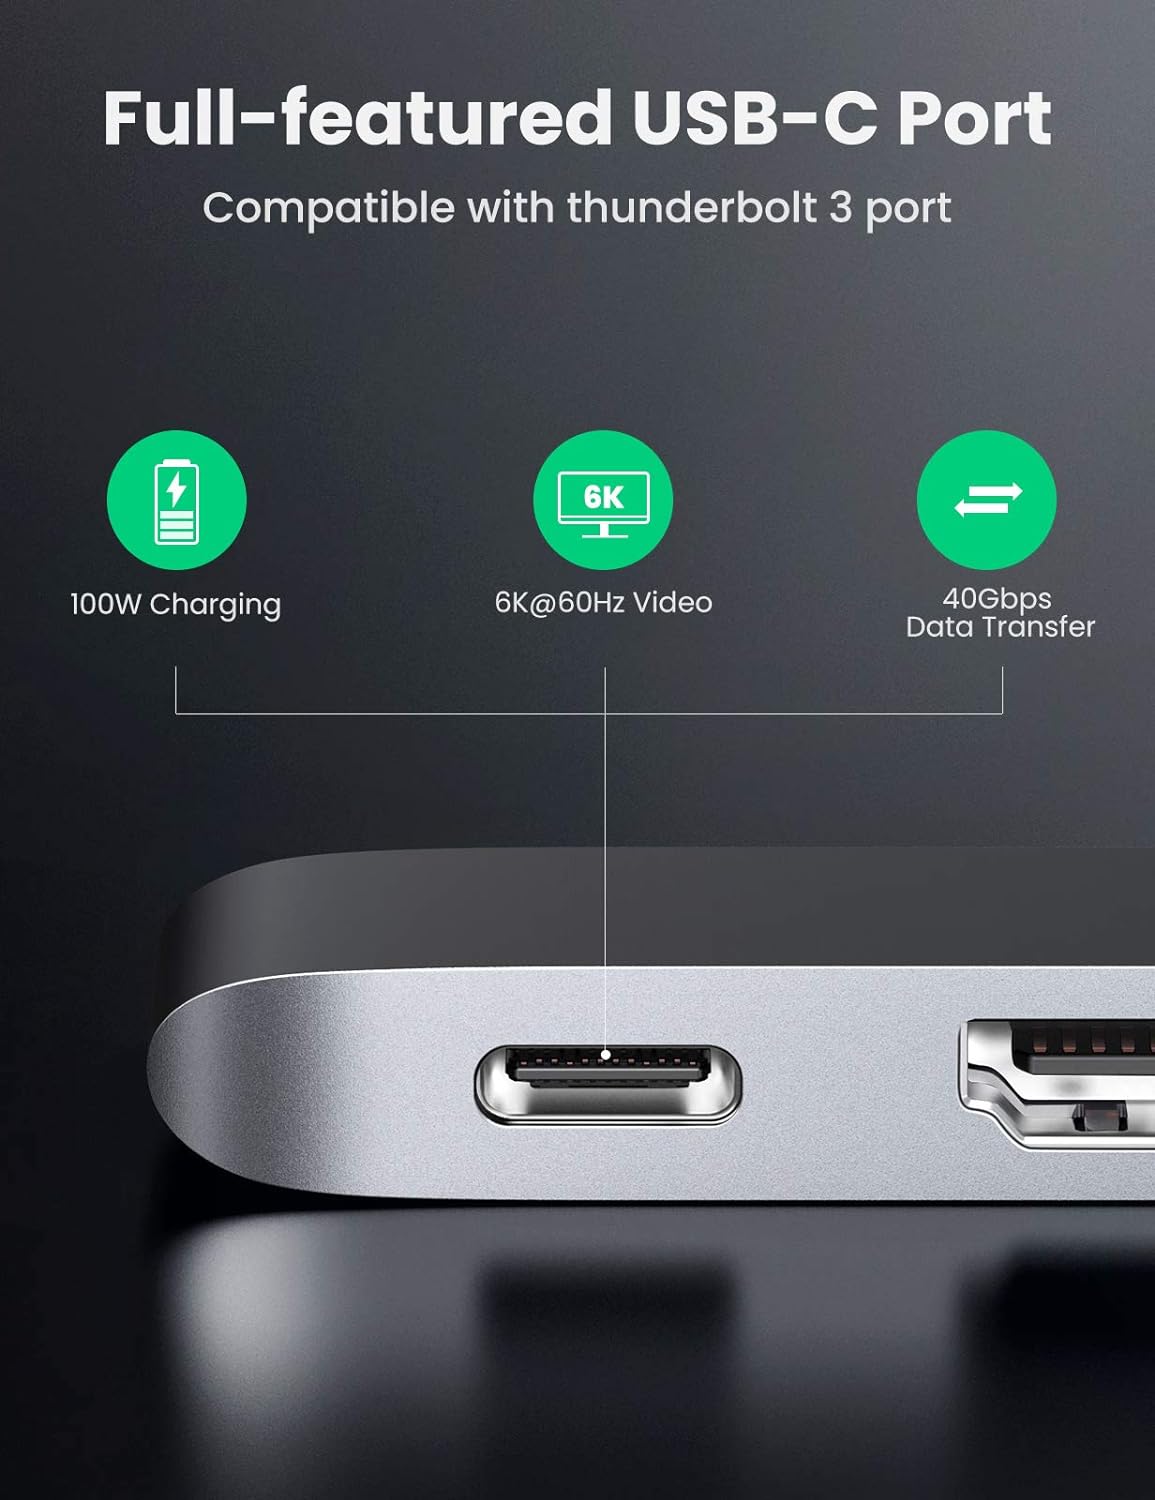 UGREEN 5-In-2 USB C Hub for MacBook Pro M1 2021 Dual Type C Dock Adapter with 4K HDMI, USB-C Gen 2 port, 3*USB 3.0 Ports Compatible for Macbook Pro/Air M1 2021/2020/2019/2018/2017/2016 - Space Grey